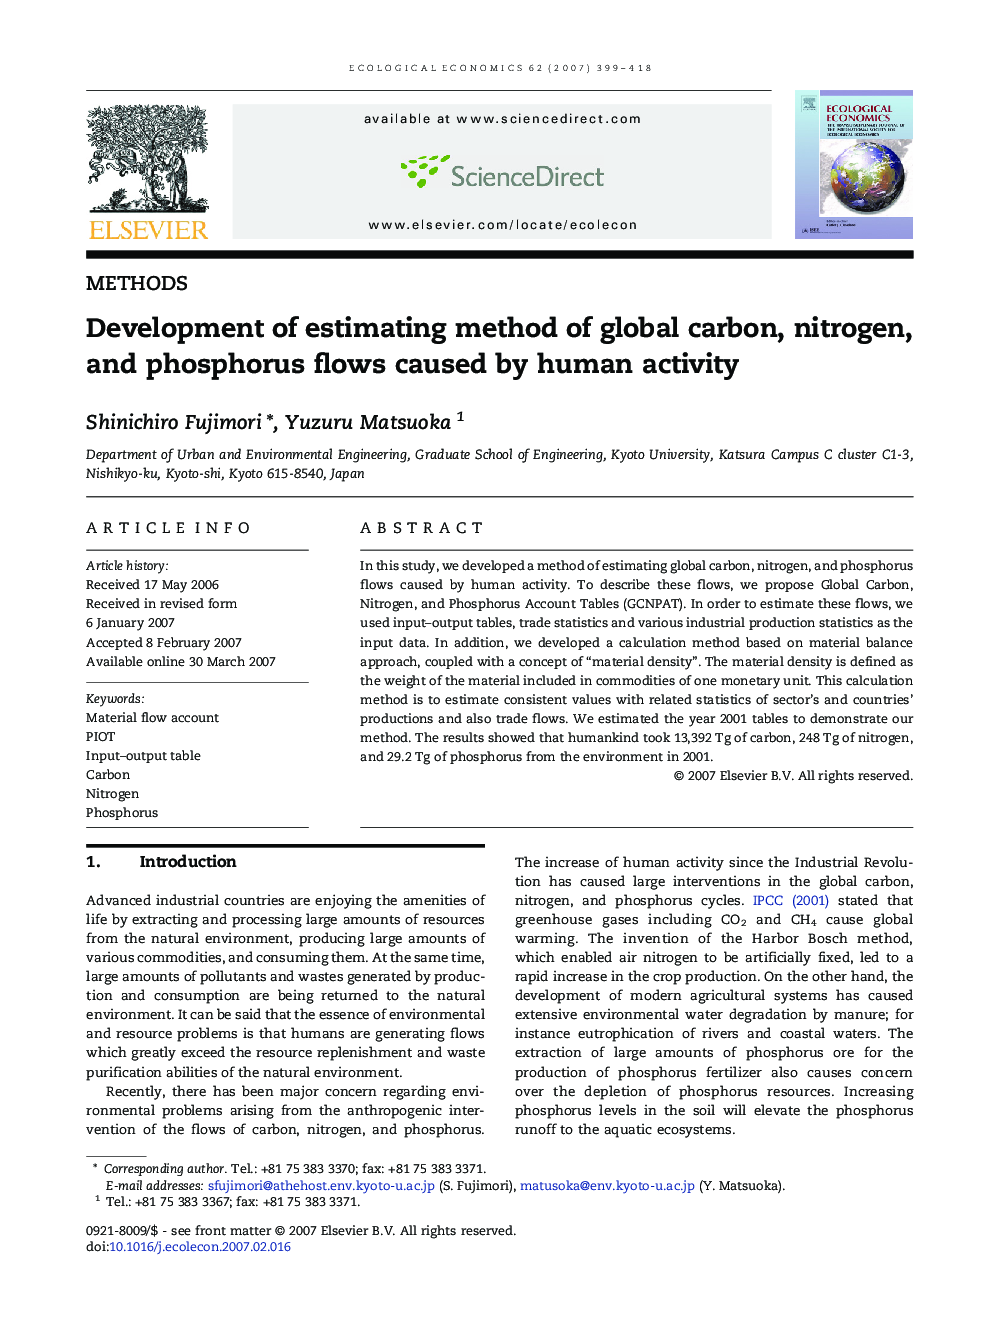 Development of estimating method of global carbon, nitrogen, and phosphorus flows caused by human activity